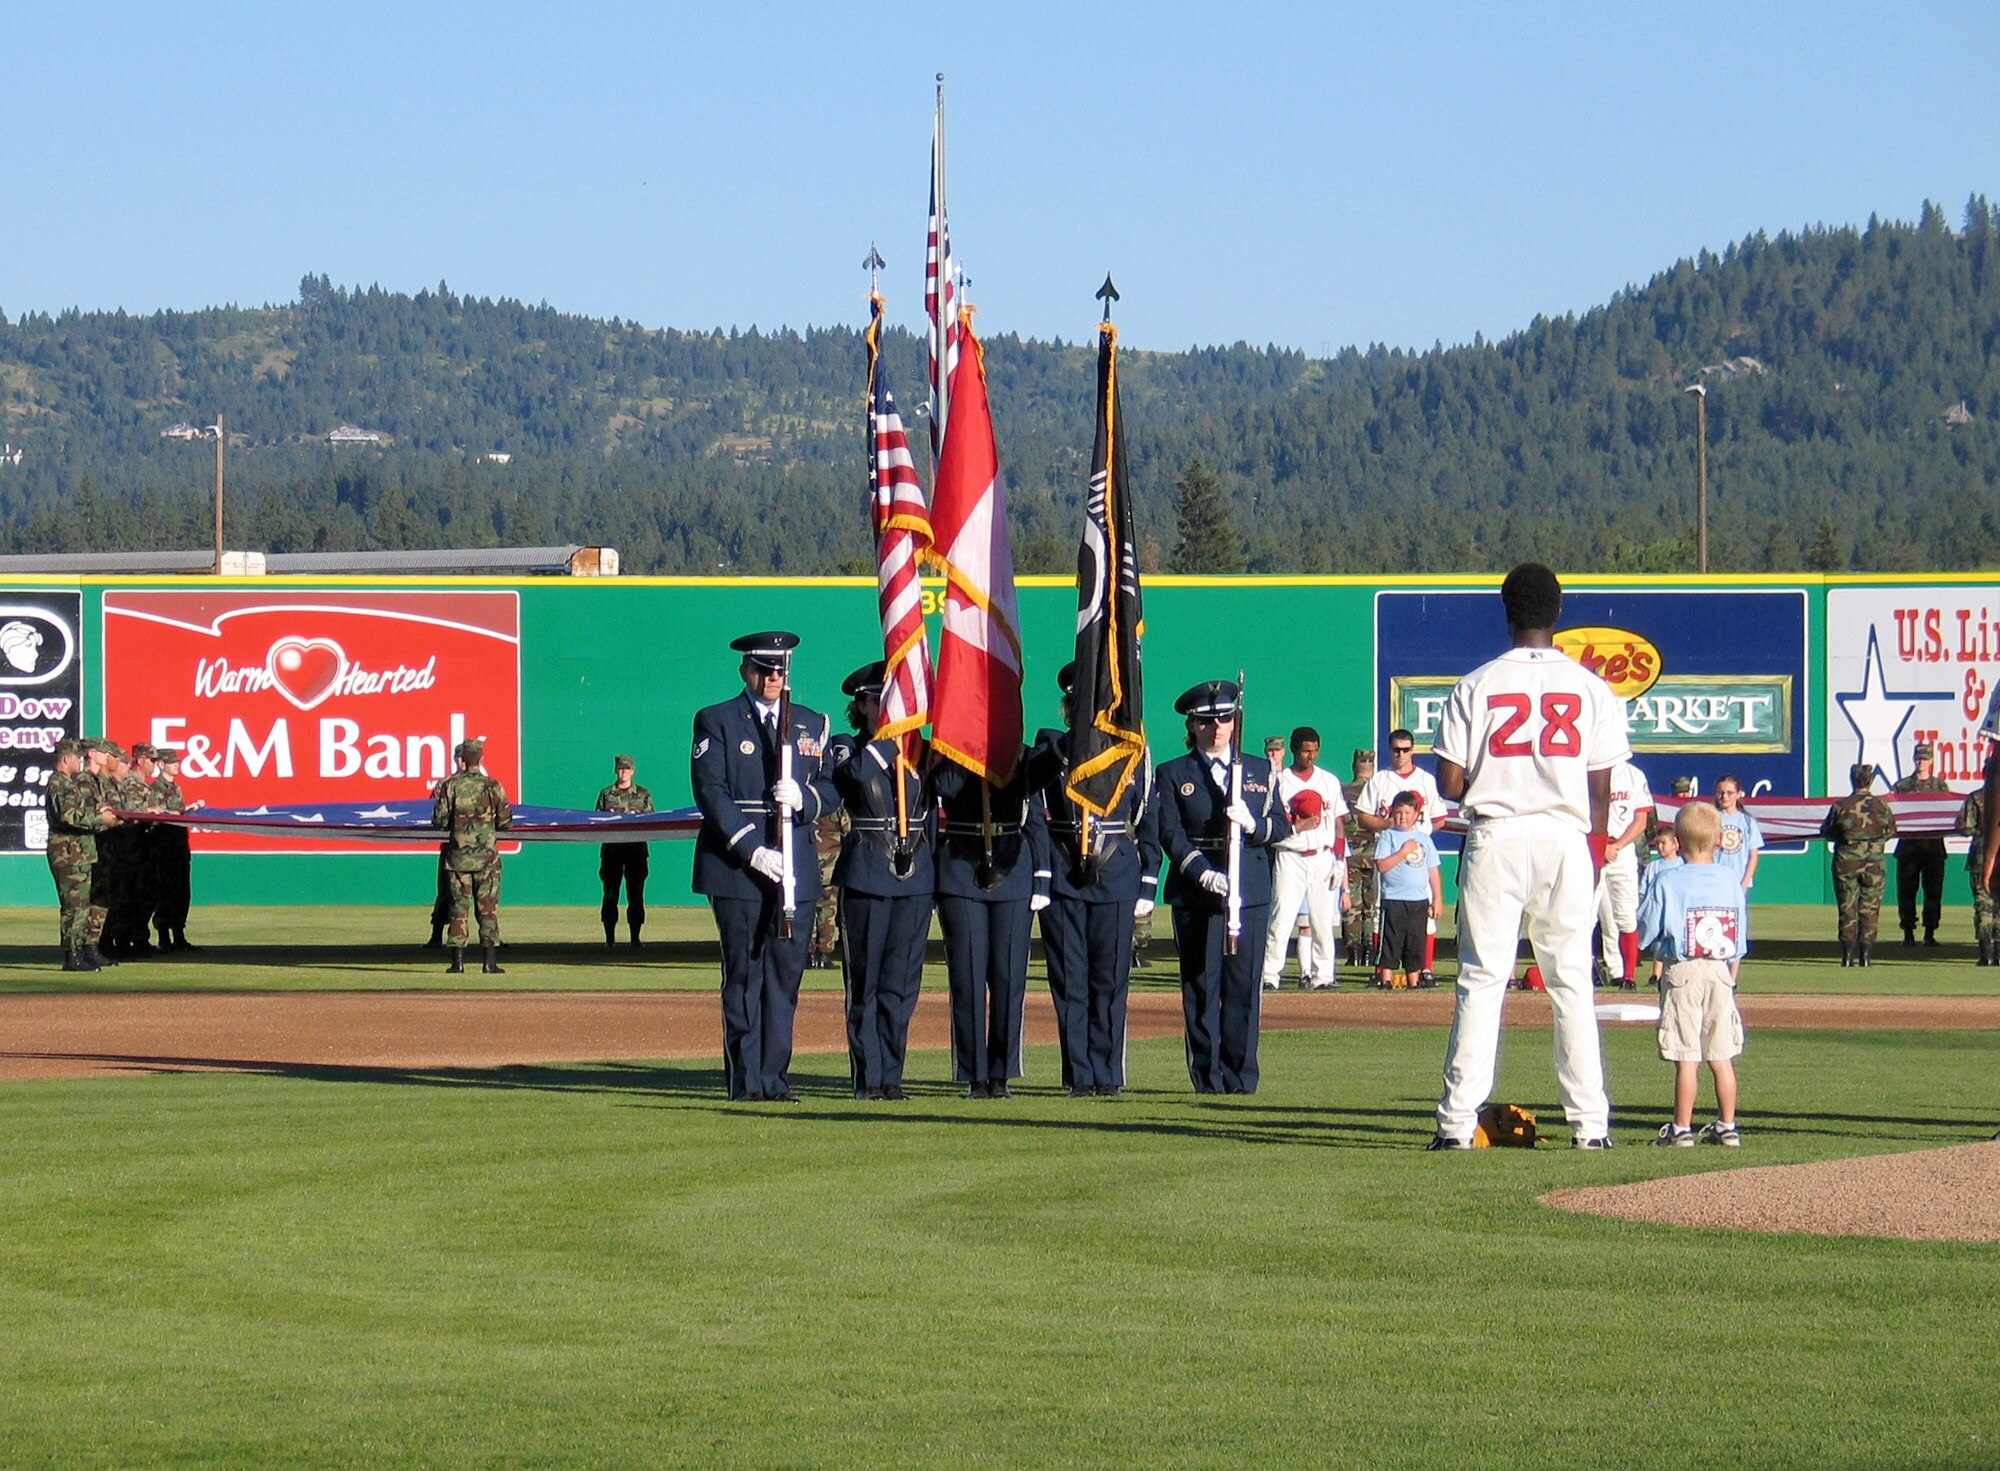 FAIRCHILD AIR FORCE BASE, Wash. – Fairchild Honor Guard members post the colors during the National Anthem on the Avista Stadium field in Spokane during a patriotic pre-game ceremony July 4. Behind the Honor Guard, thirty active-duty Air Force members from Fairchild hold an American flag as Spokane Indians baseball players honor the flag and anthem. More than 7,000 baseball fans attended the game and ceremony. (U.S. Air Force photo/ Staff Sgt. Connie L. Bias) 
